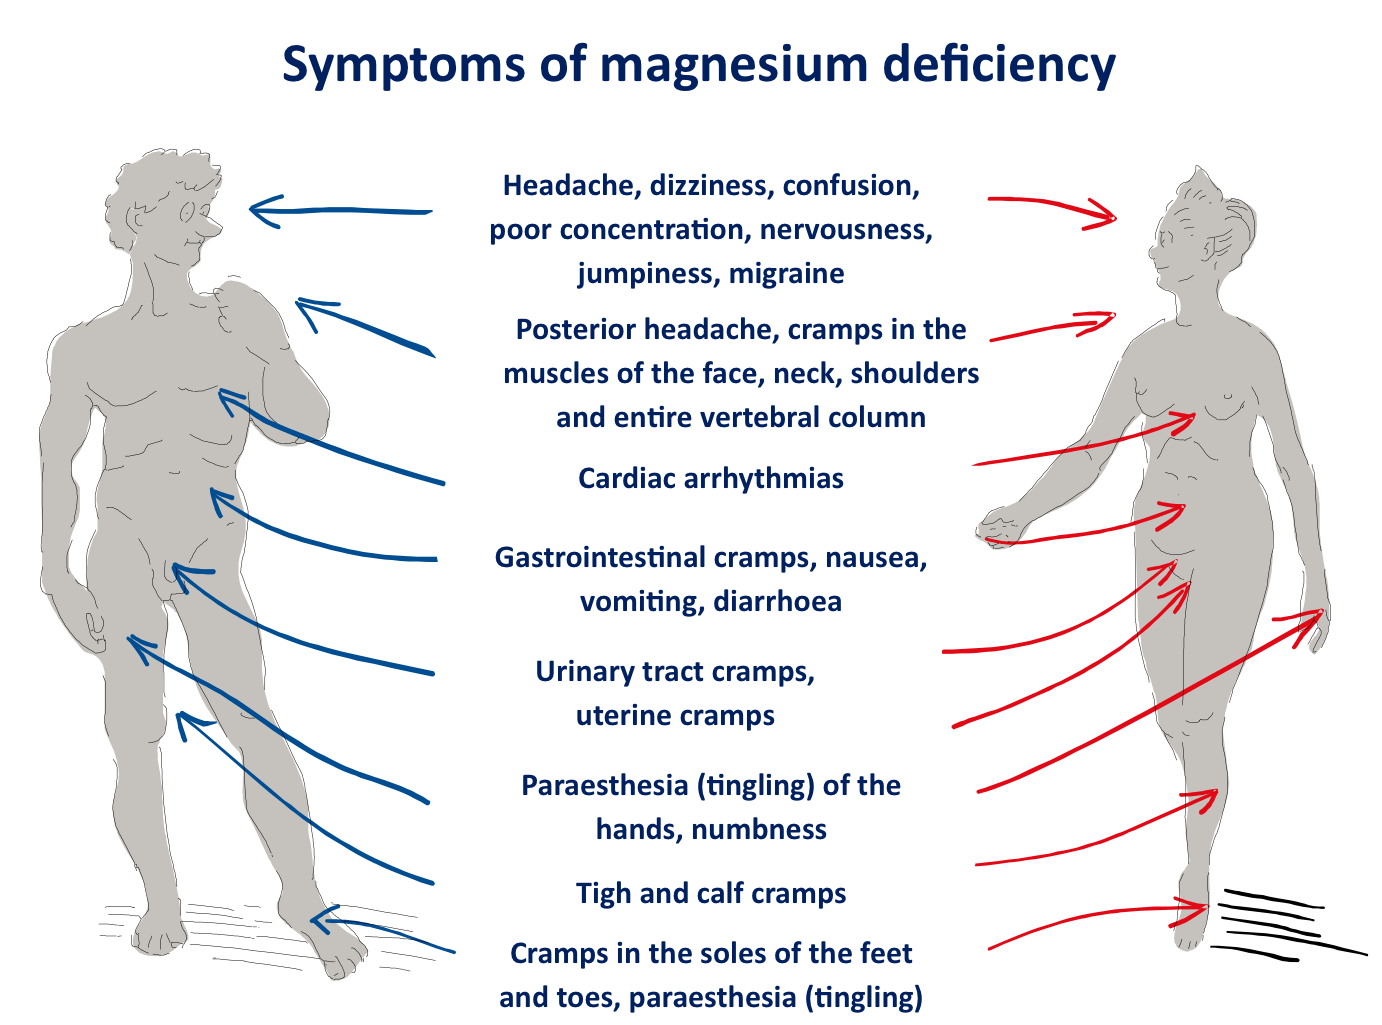 Why is magnesium so important for athletes?